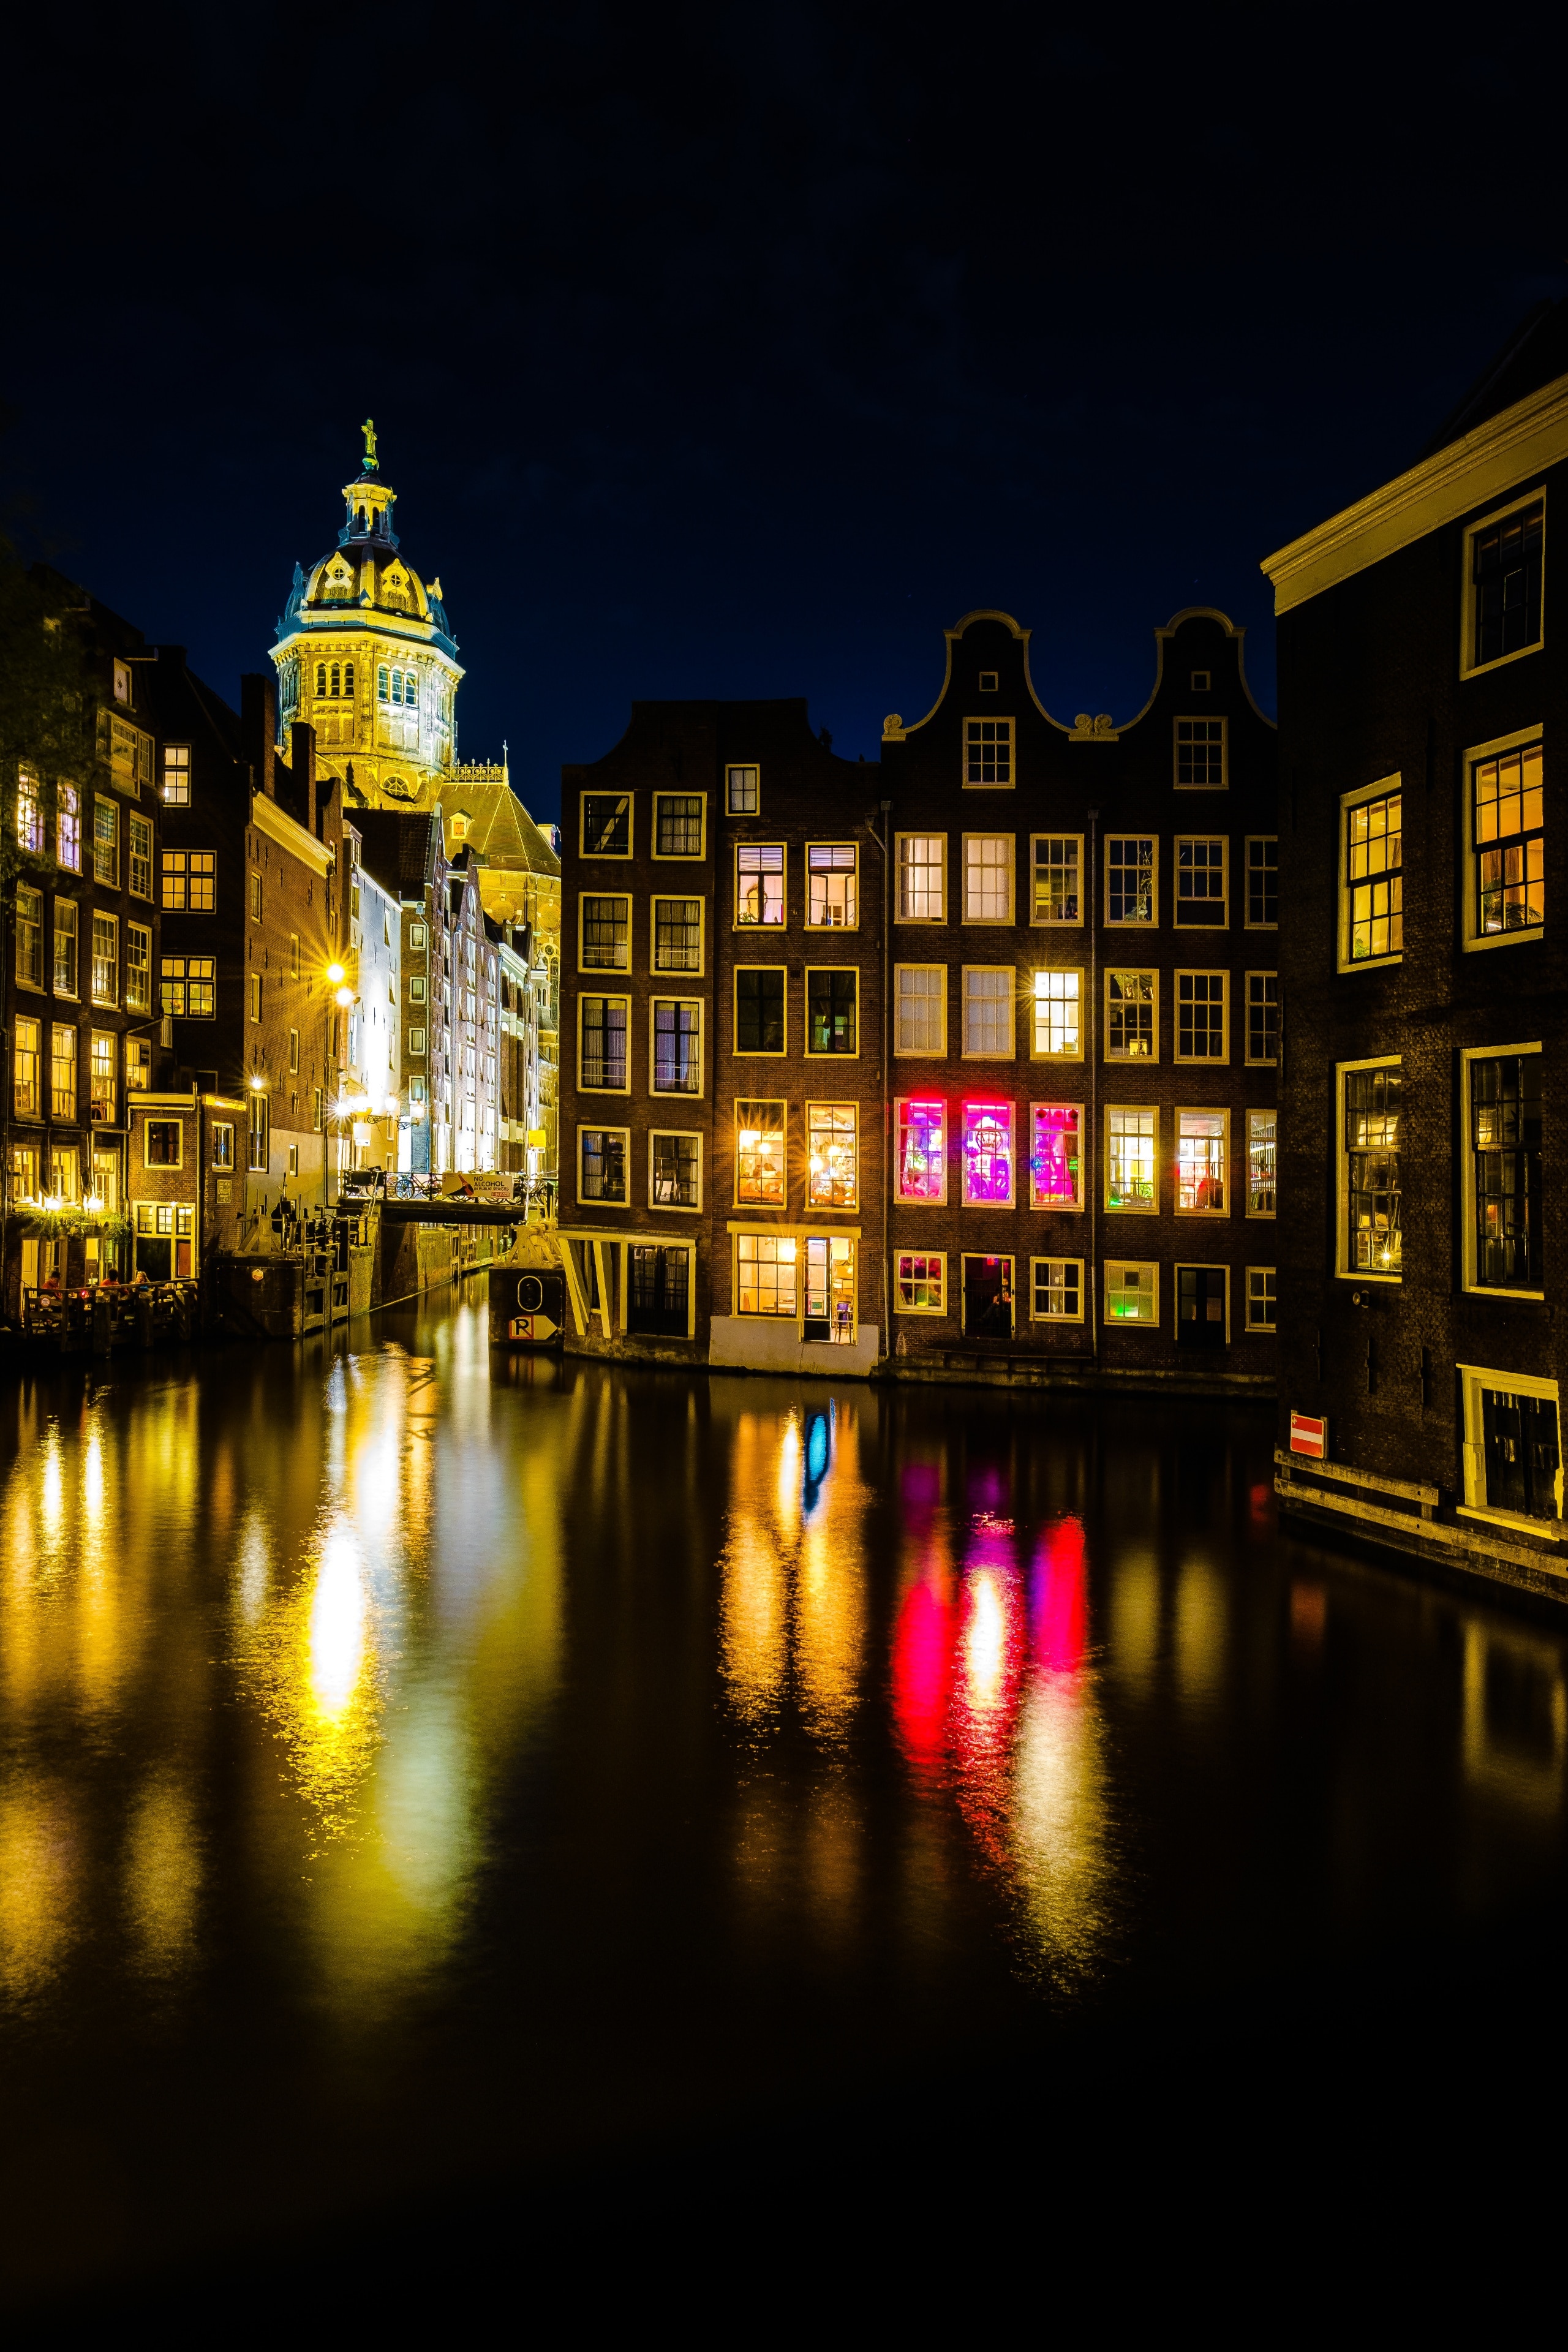 You can capture beautiful reflection shots in Amsterdam at night. In the background here the tower of the Basiliek van de Heilige Nicolaas, built between 1884 and 1887.